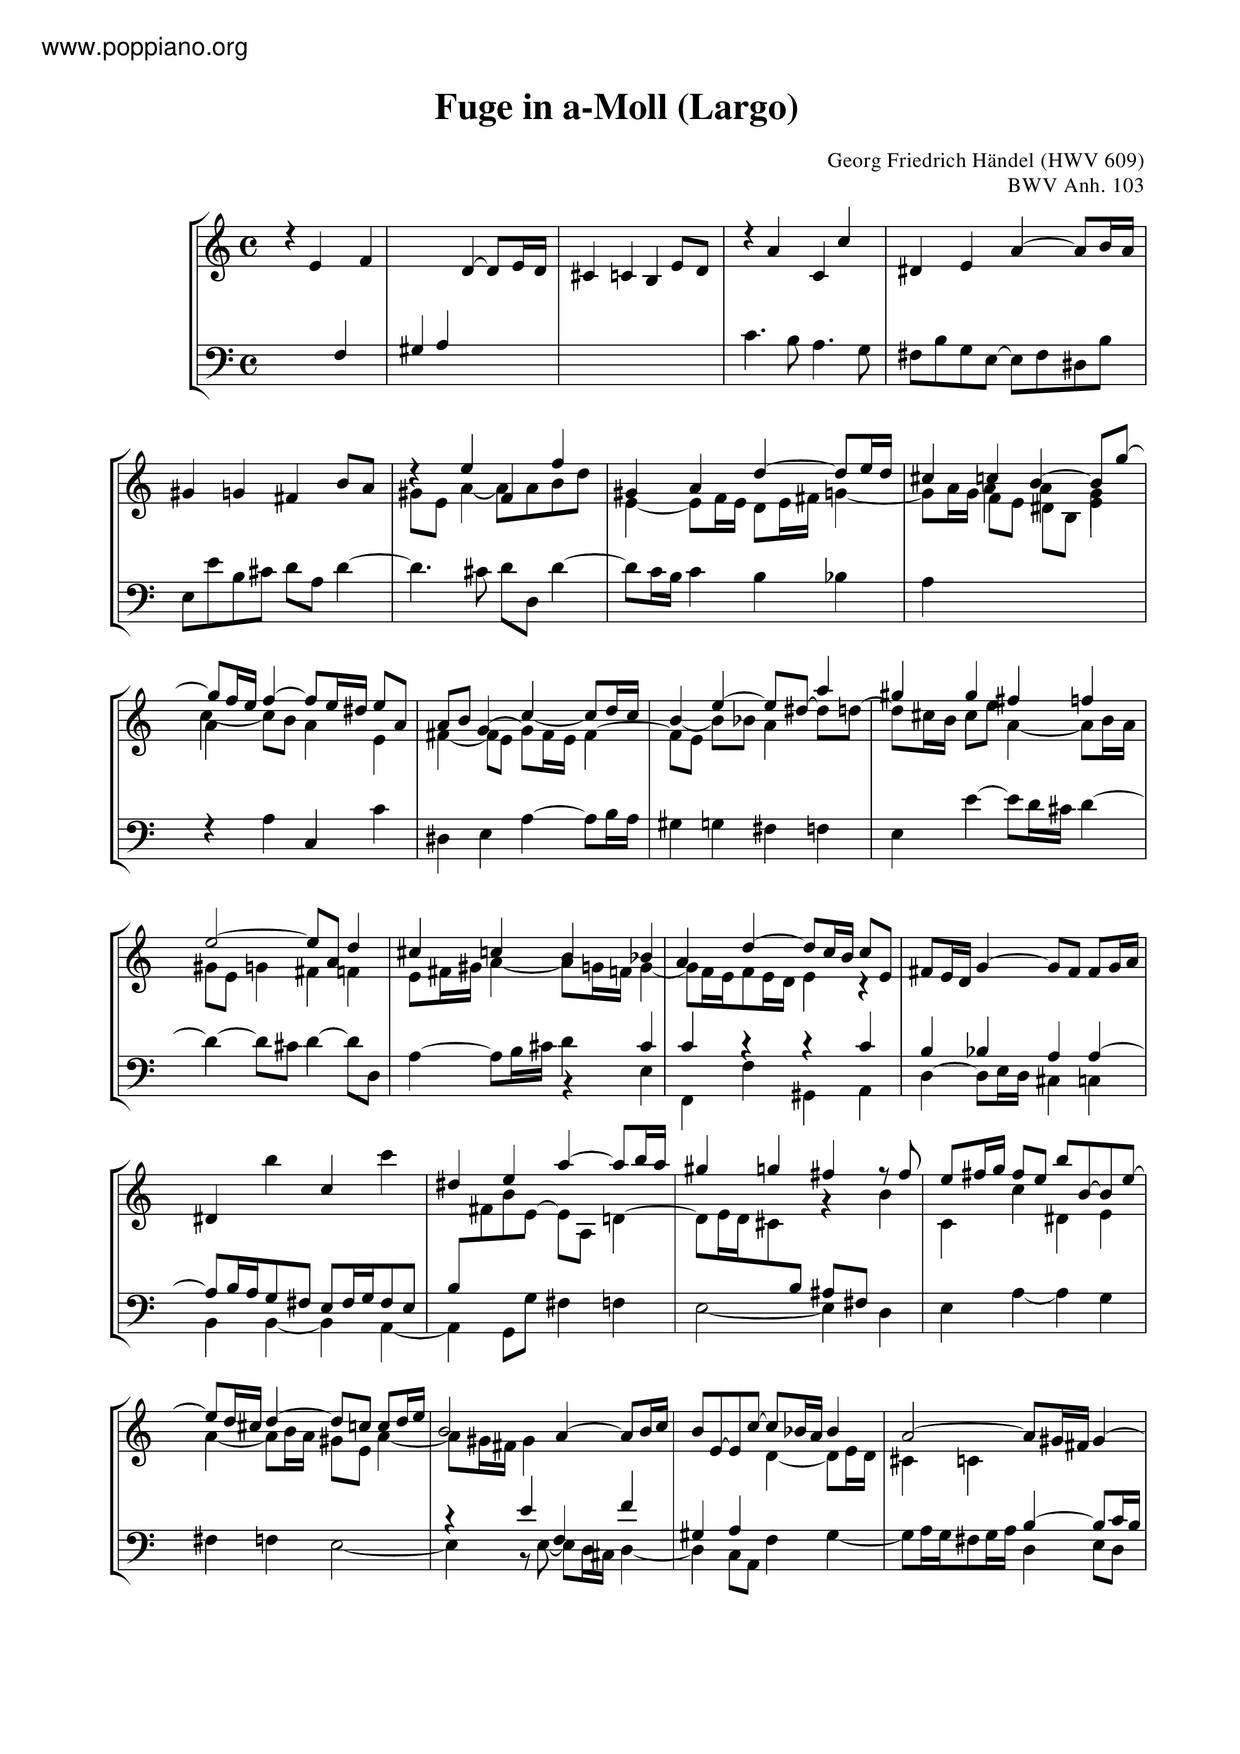 Fugue In A Minor, BWV Anh. 103ピアノ譜